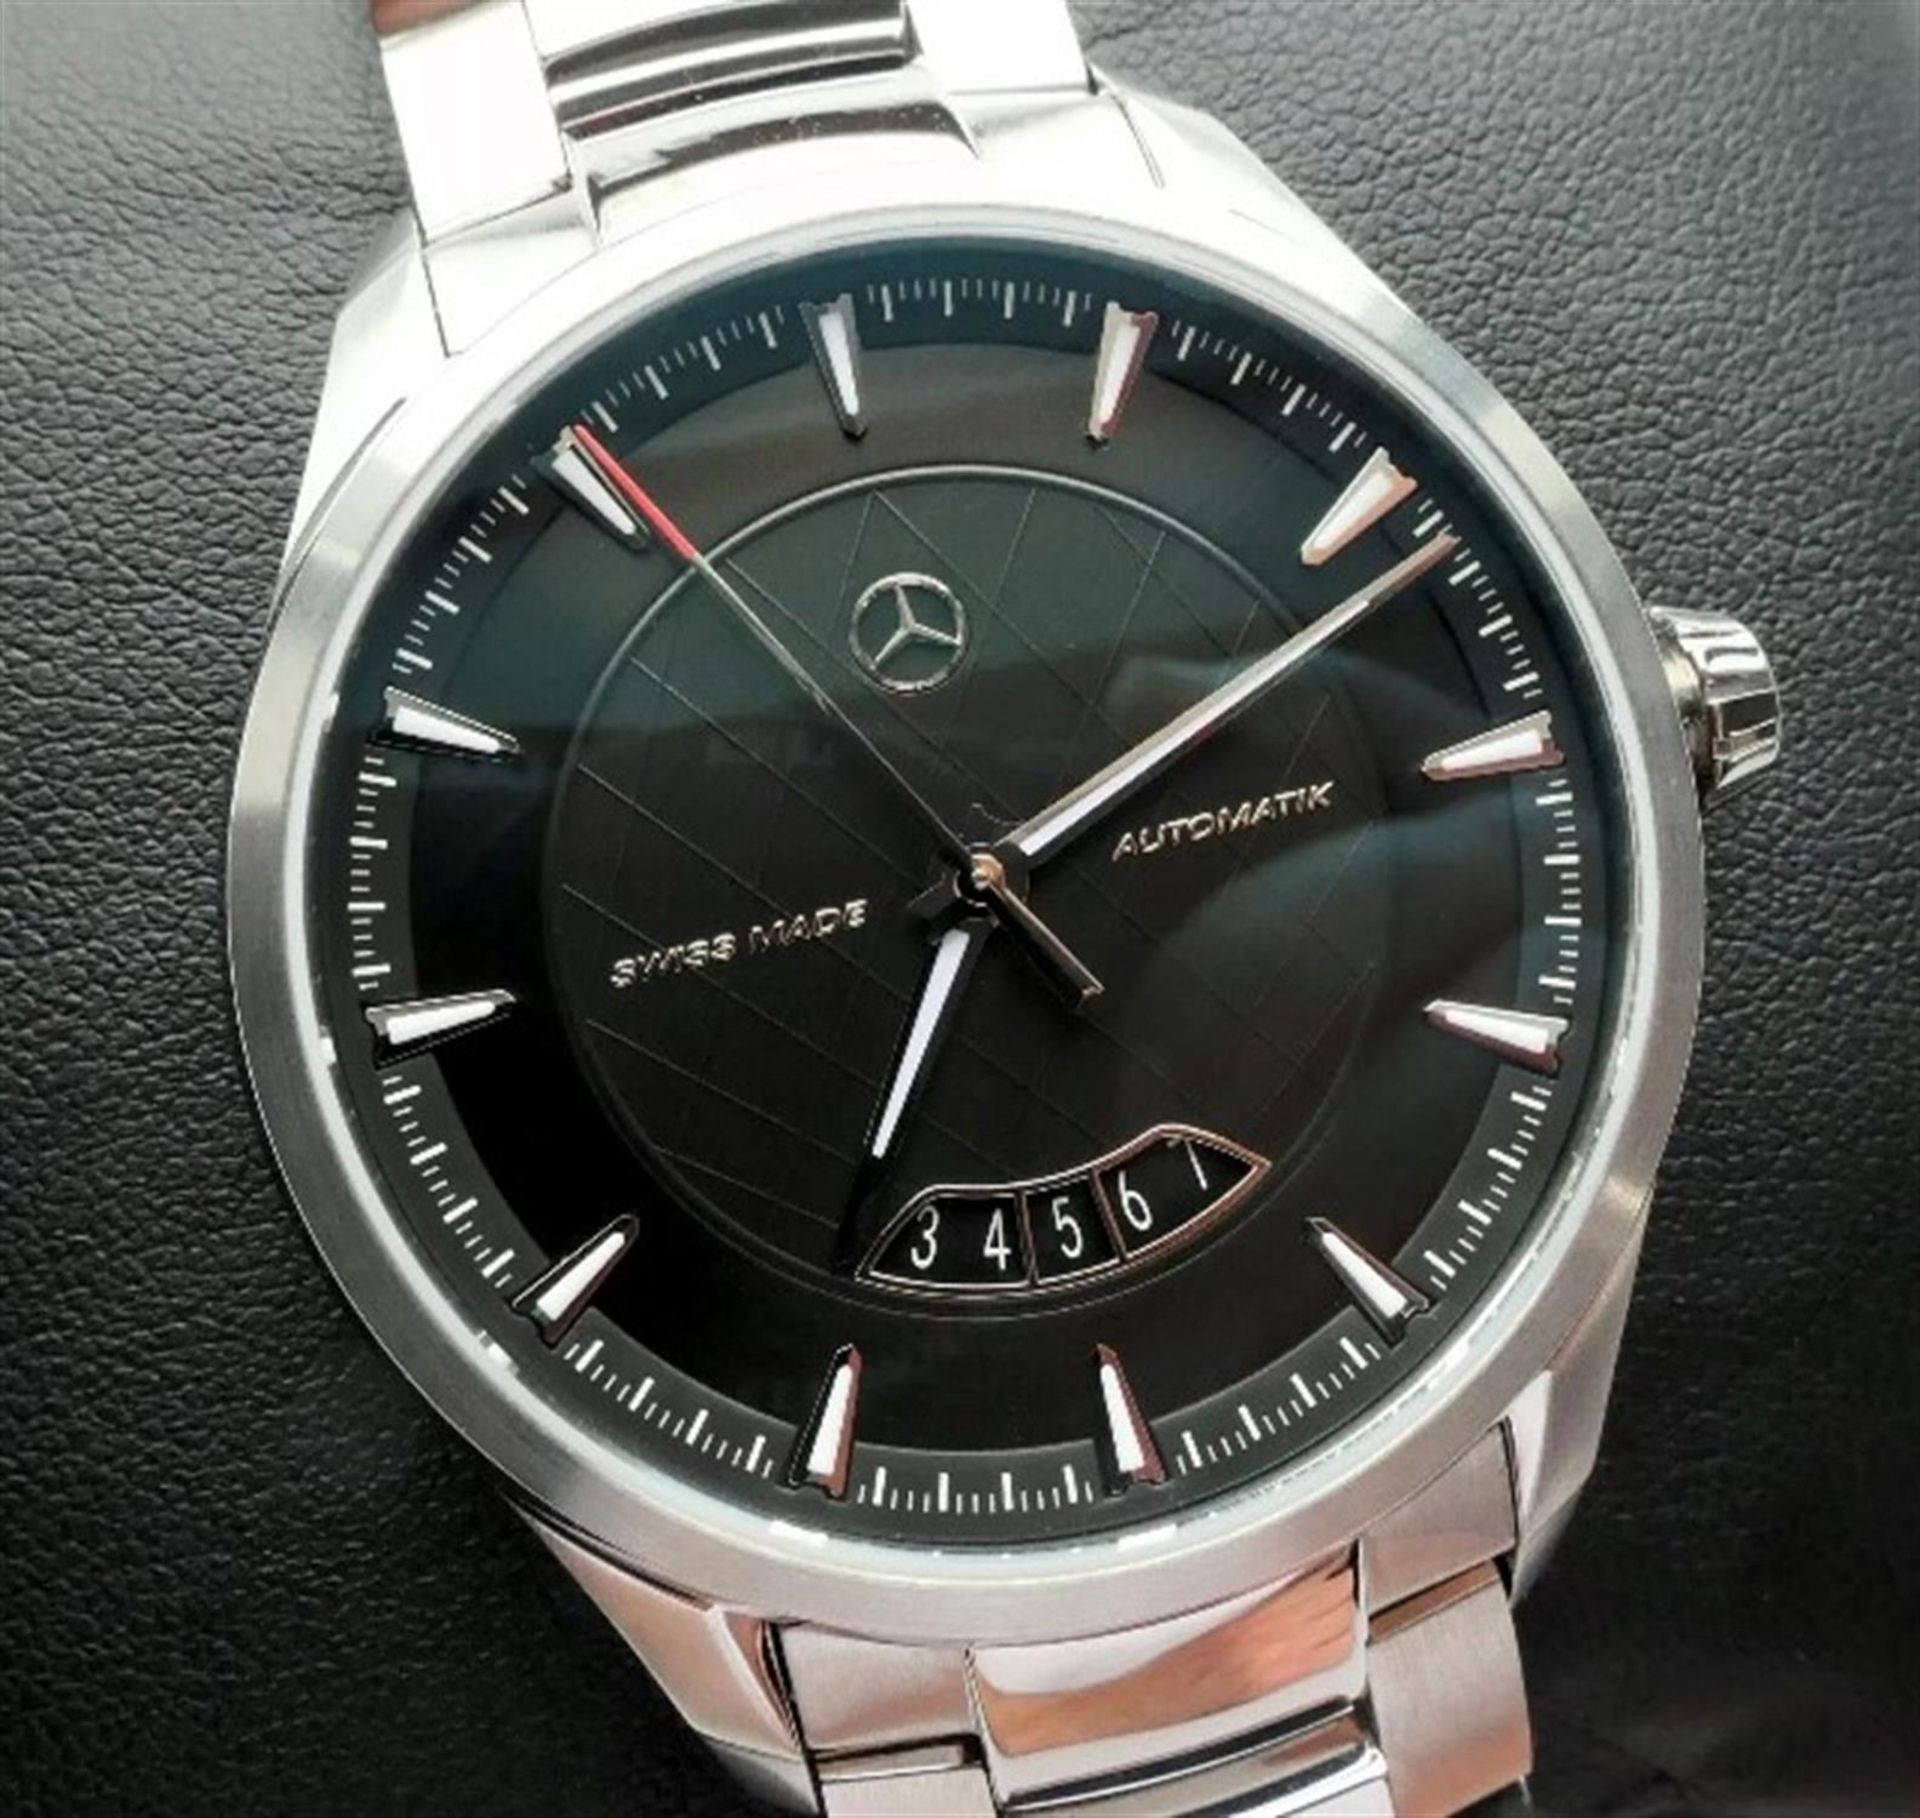 A Brand New Mercedes-Benz Classic Automatic Watch - Image 6 of 10